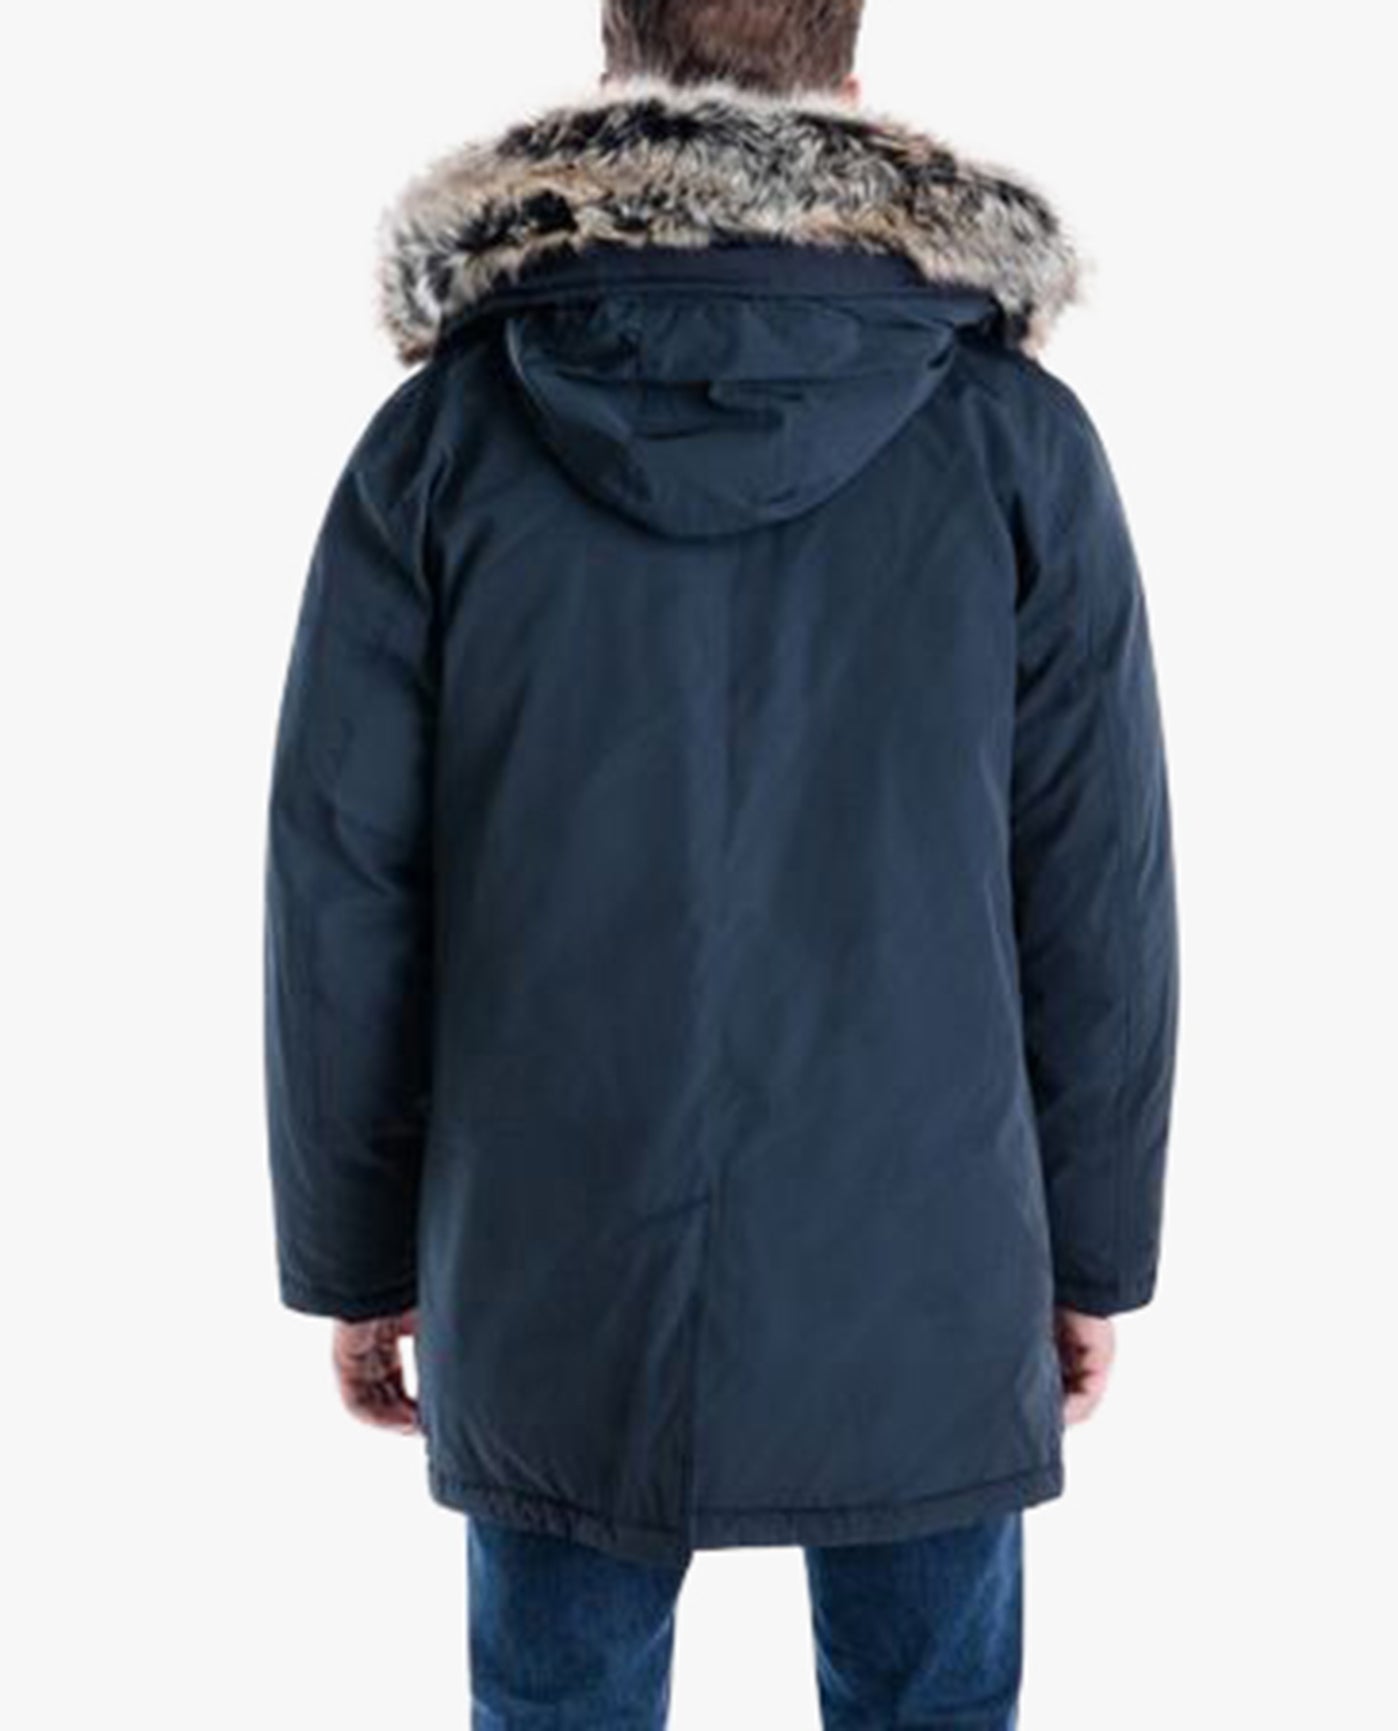 BACK VIEW OF ARTIC PARKA WITH REMOVABLE FAUX FUR TRIMMED HOOD | MIDNIGHT BLUE